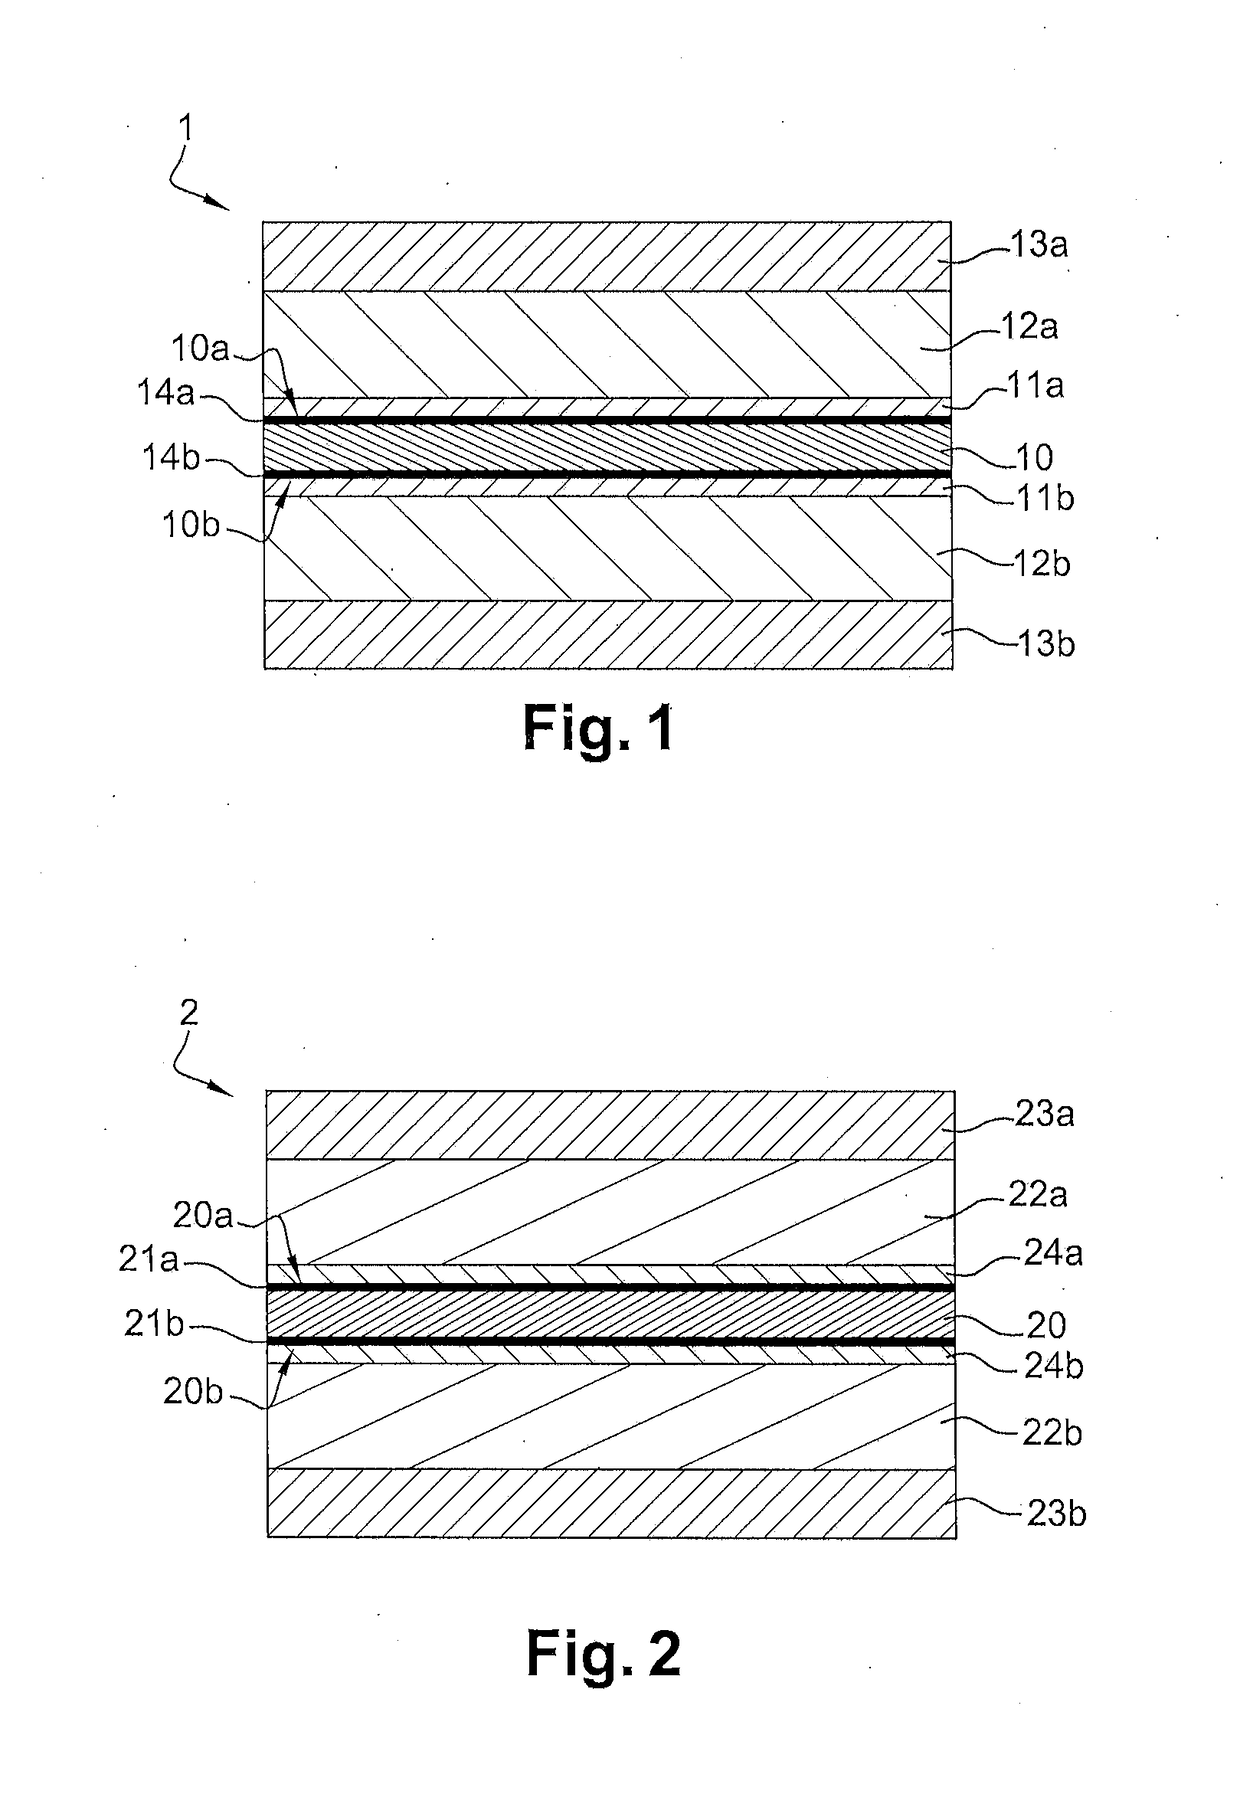 Lead-acid accumulator and method for manufacturing such an accumulator